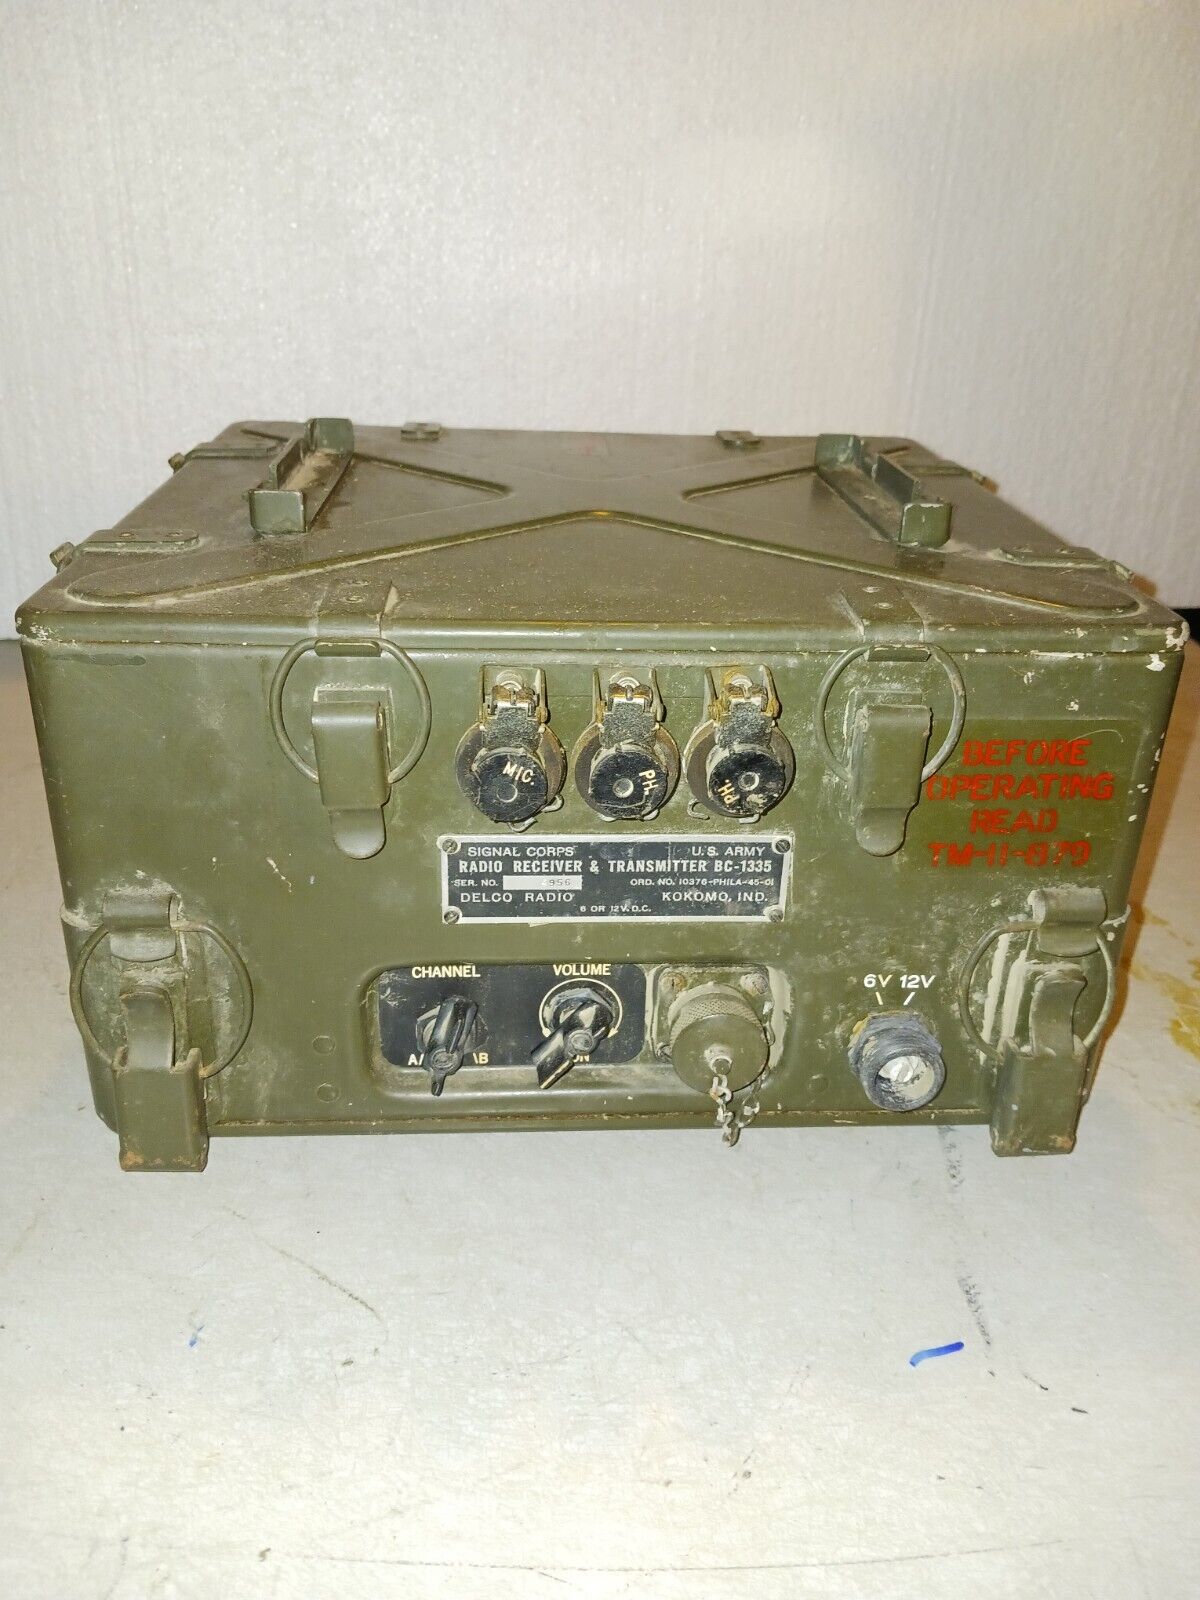 WWII ARMY BC-1335 JEEP RADIO #59